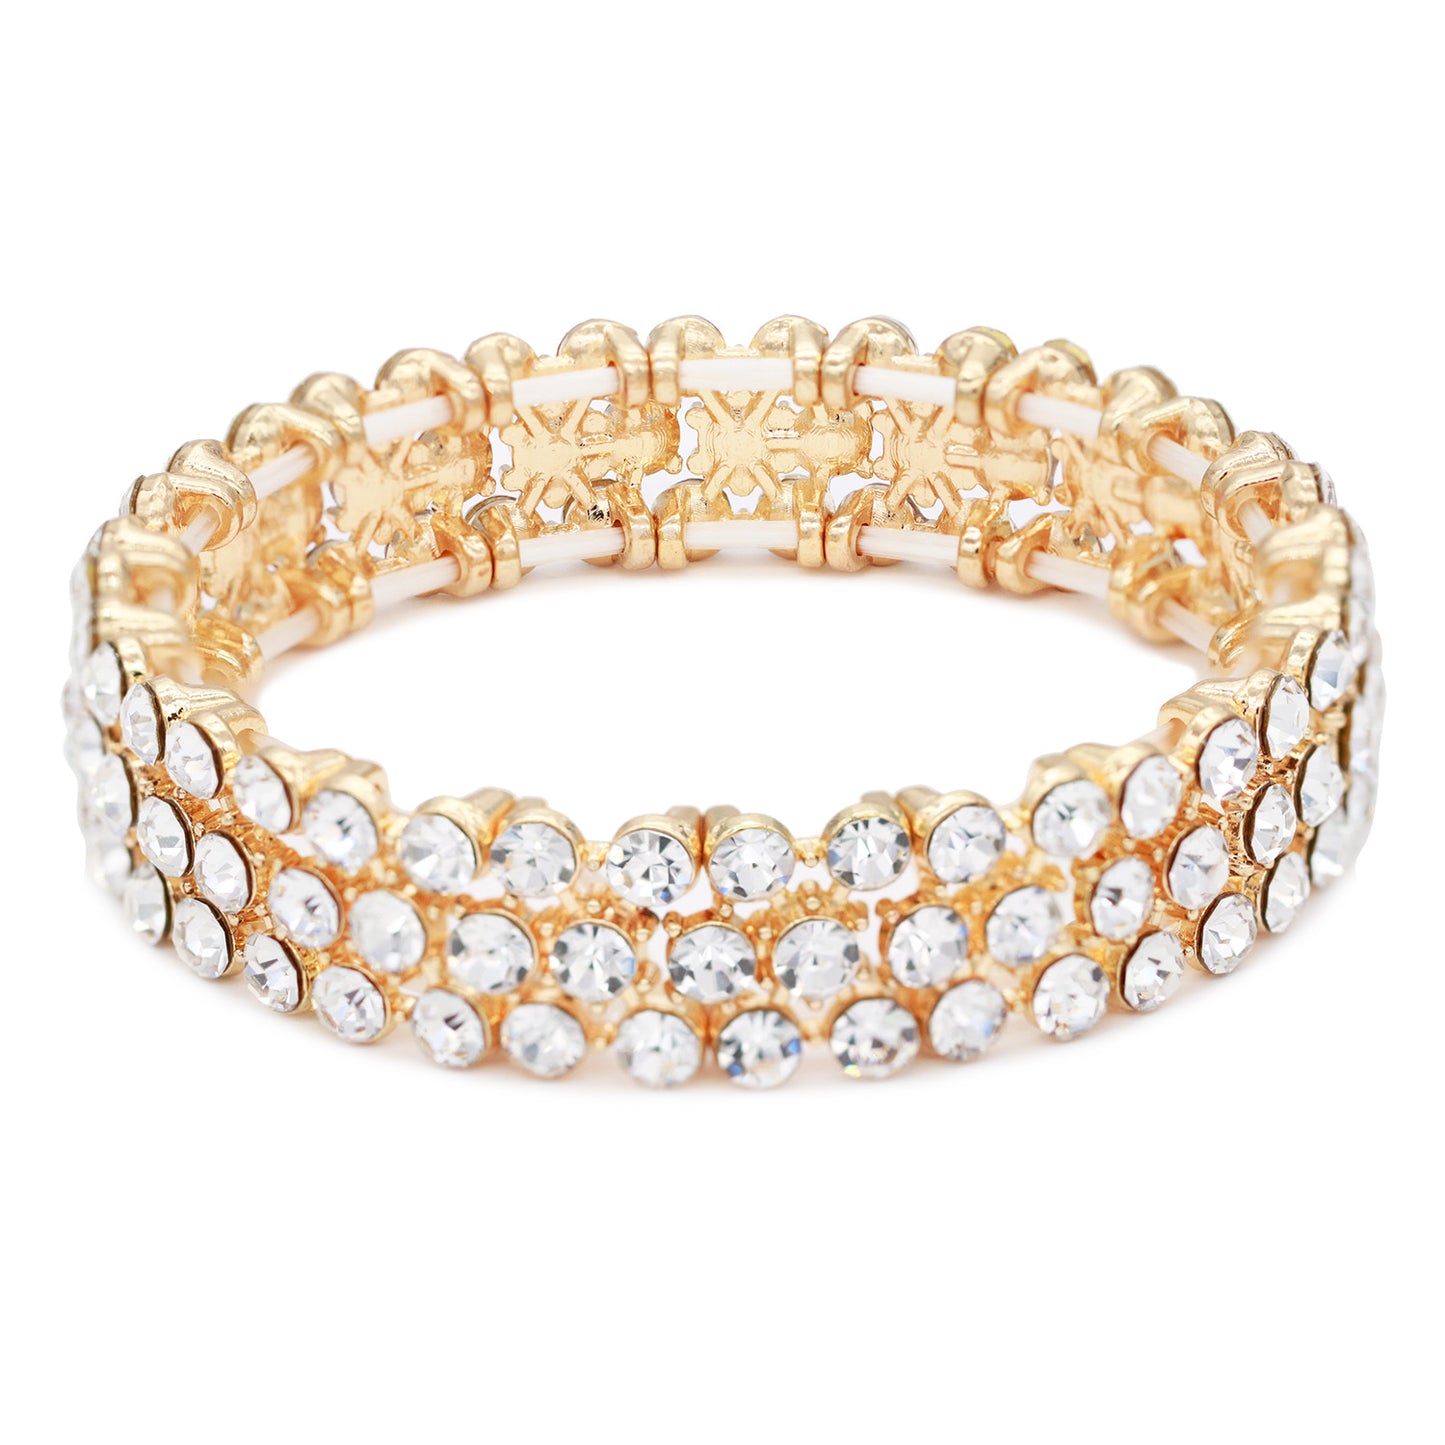 Lavencious Round Shape Rhinestones Thin 3 Rows Elastic Stretch Bracelet Party Jewelry for Women 7"(Gold Clear)